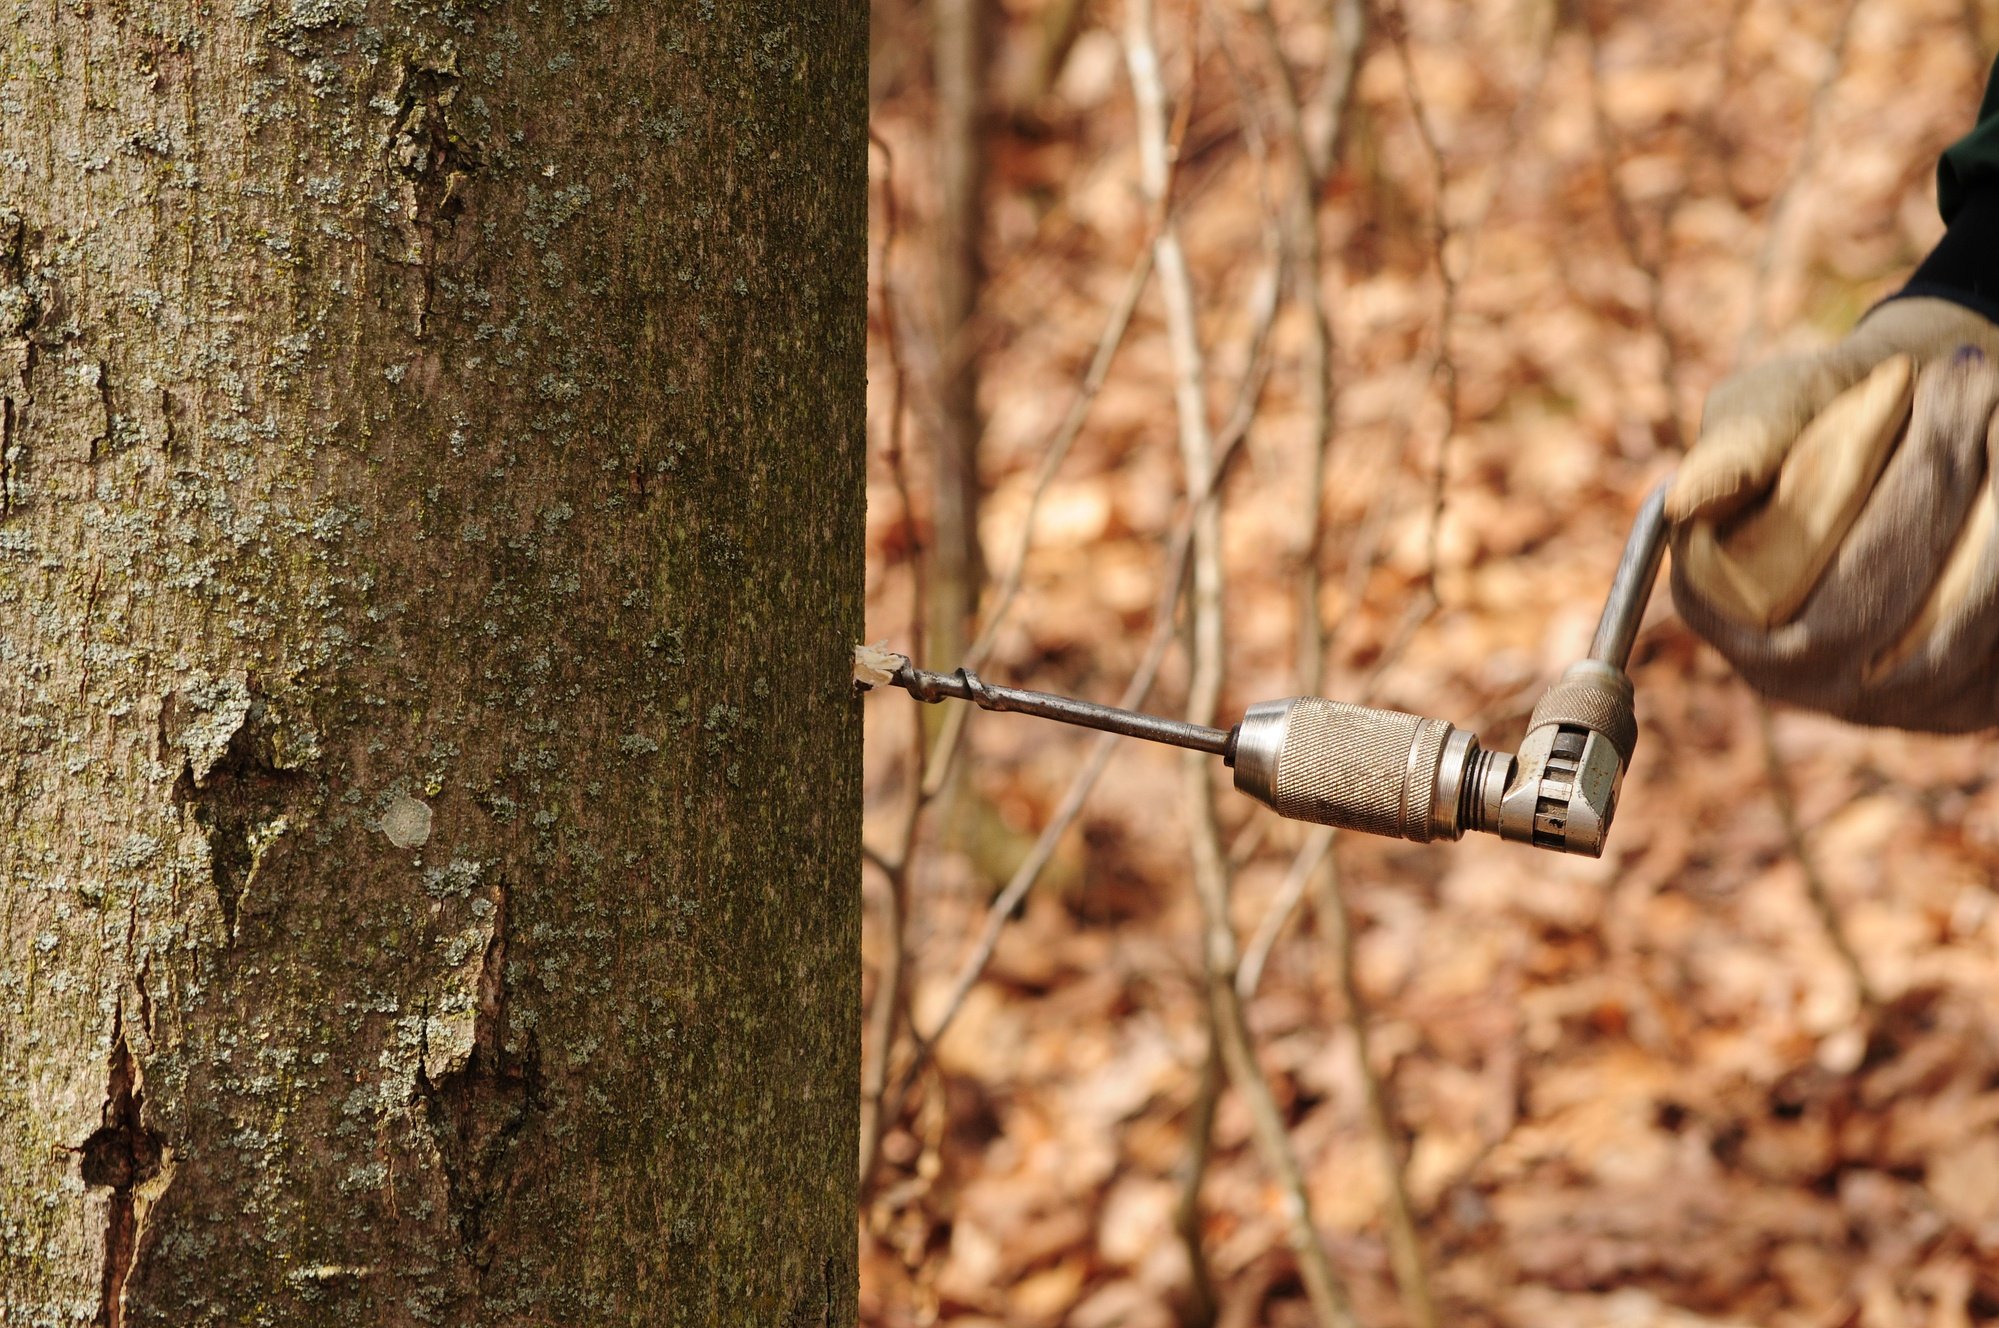 Learn how to drill a hole in a maple tree for sap collection at a maple syrup festival in Canada